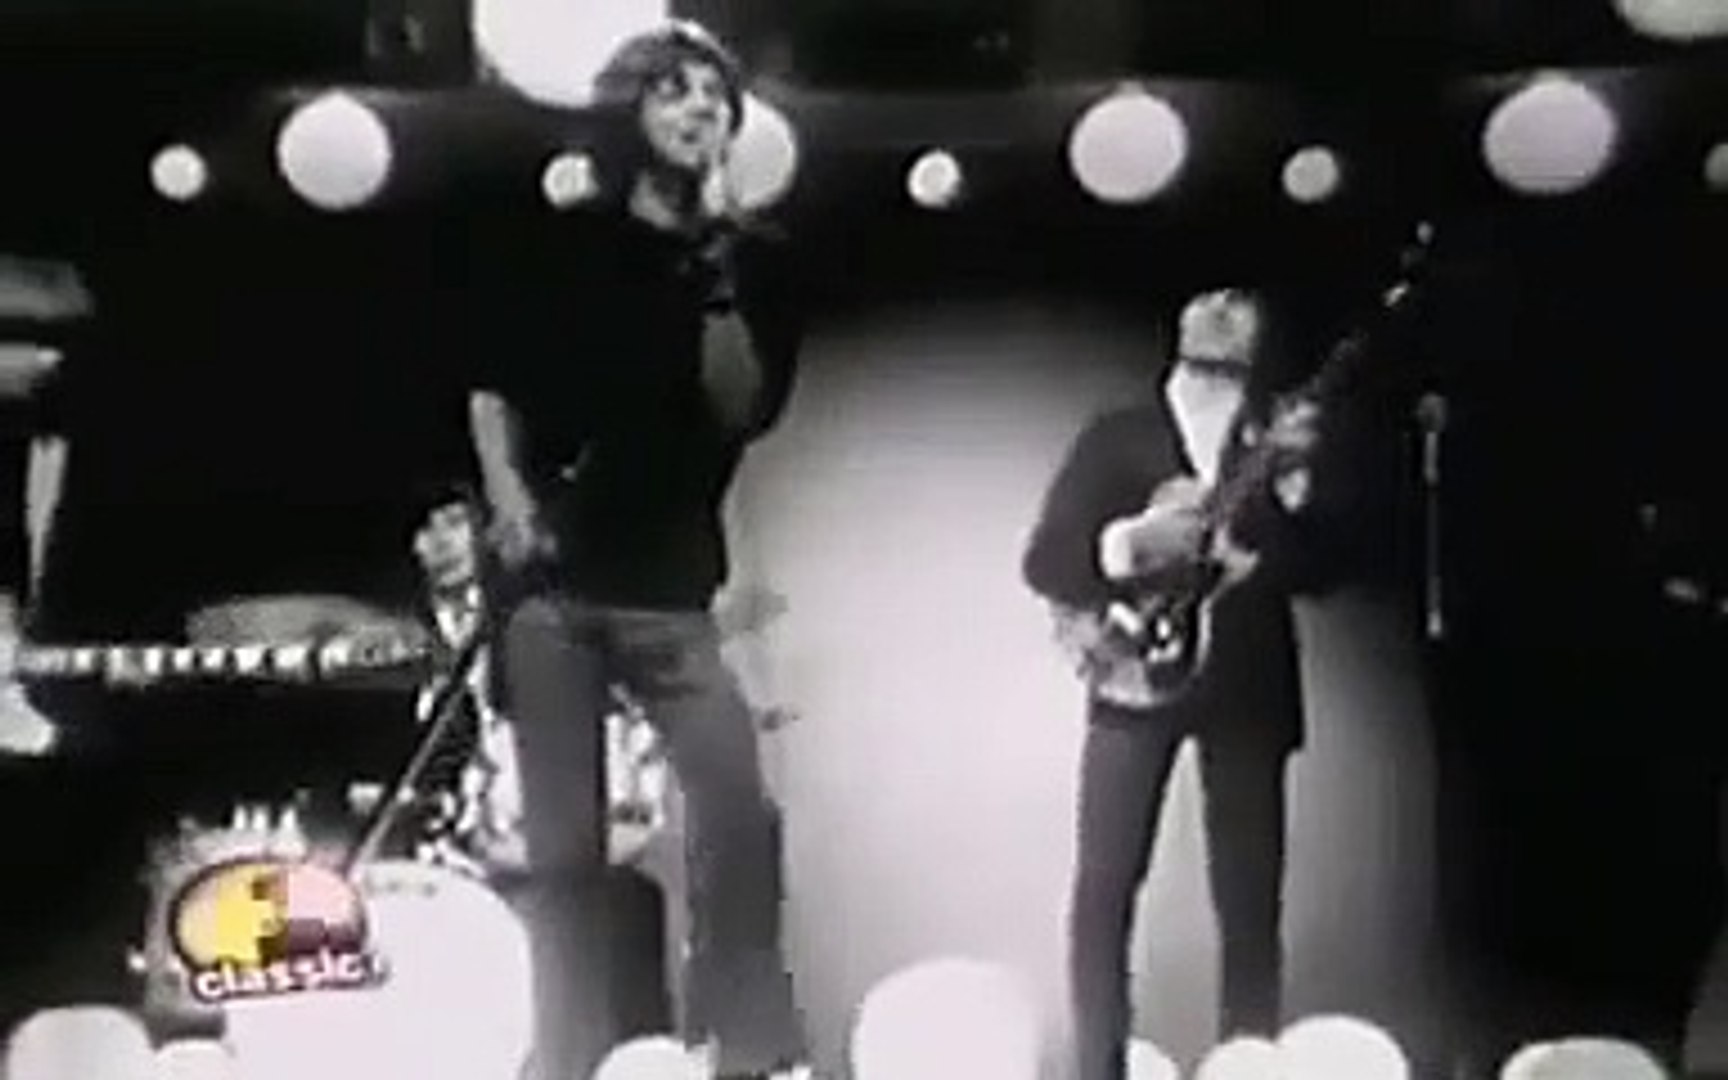 Rolling stones - Get off of my cloud 1965 - Video Dailymotion